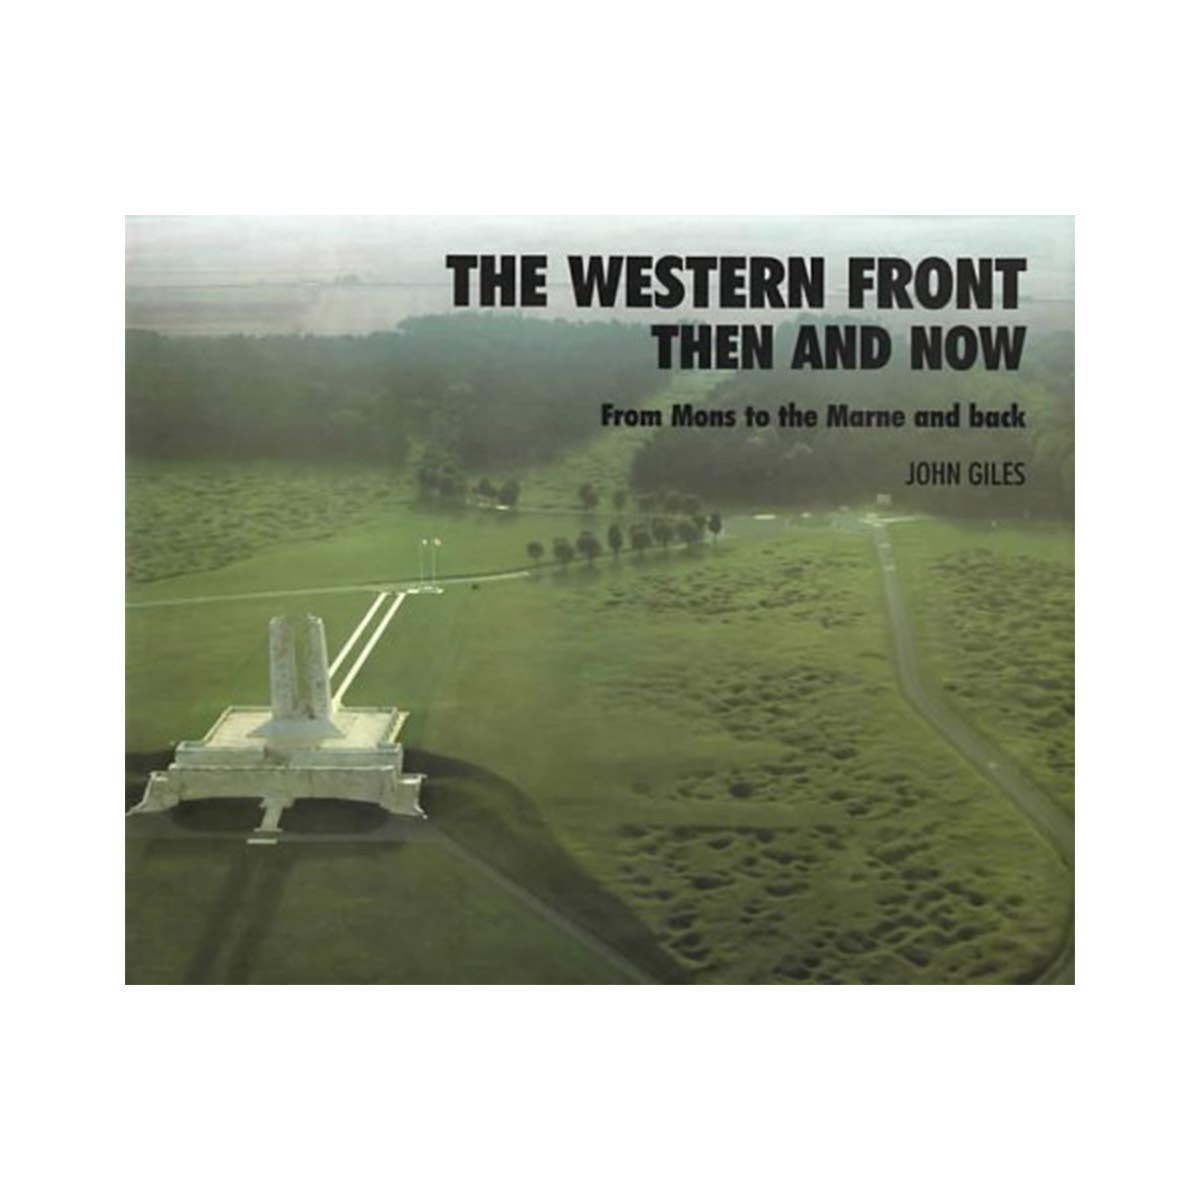 Then & Now: The Western Front Book